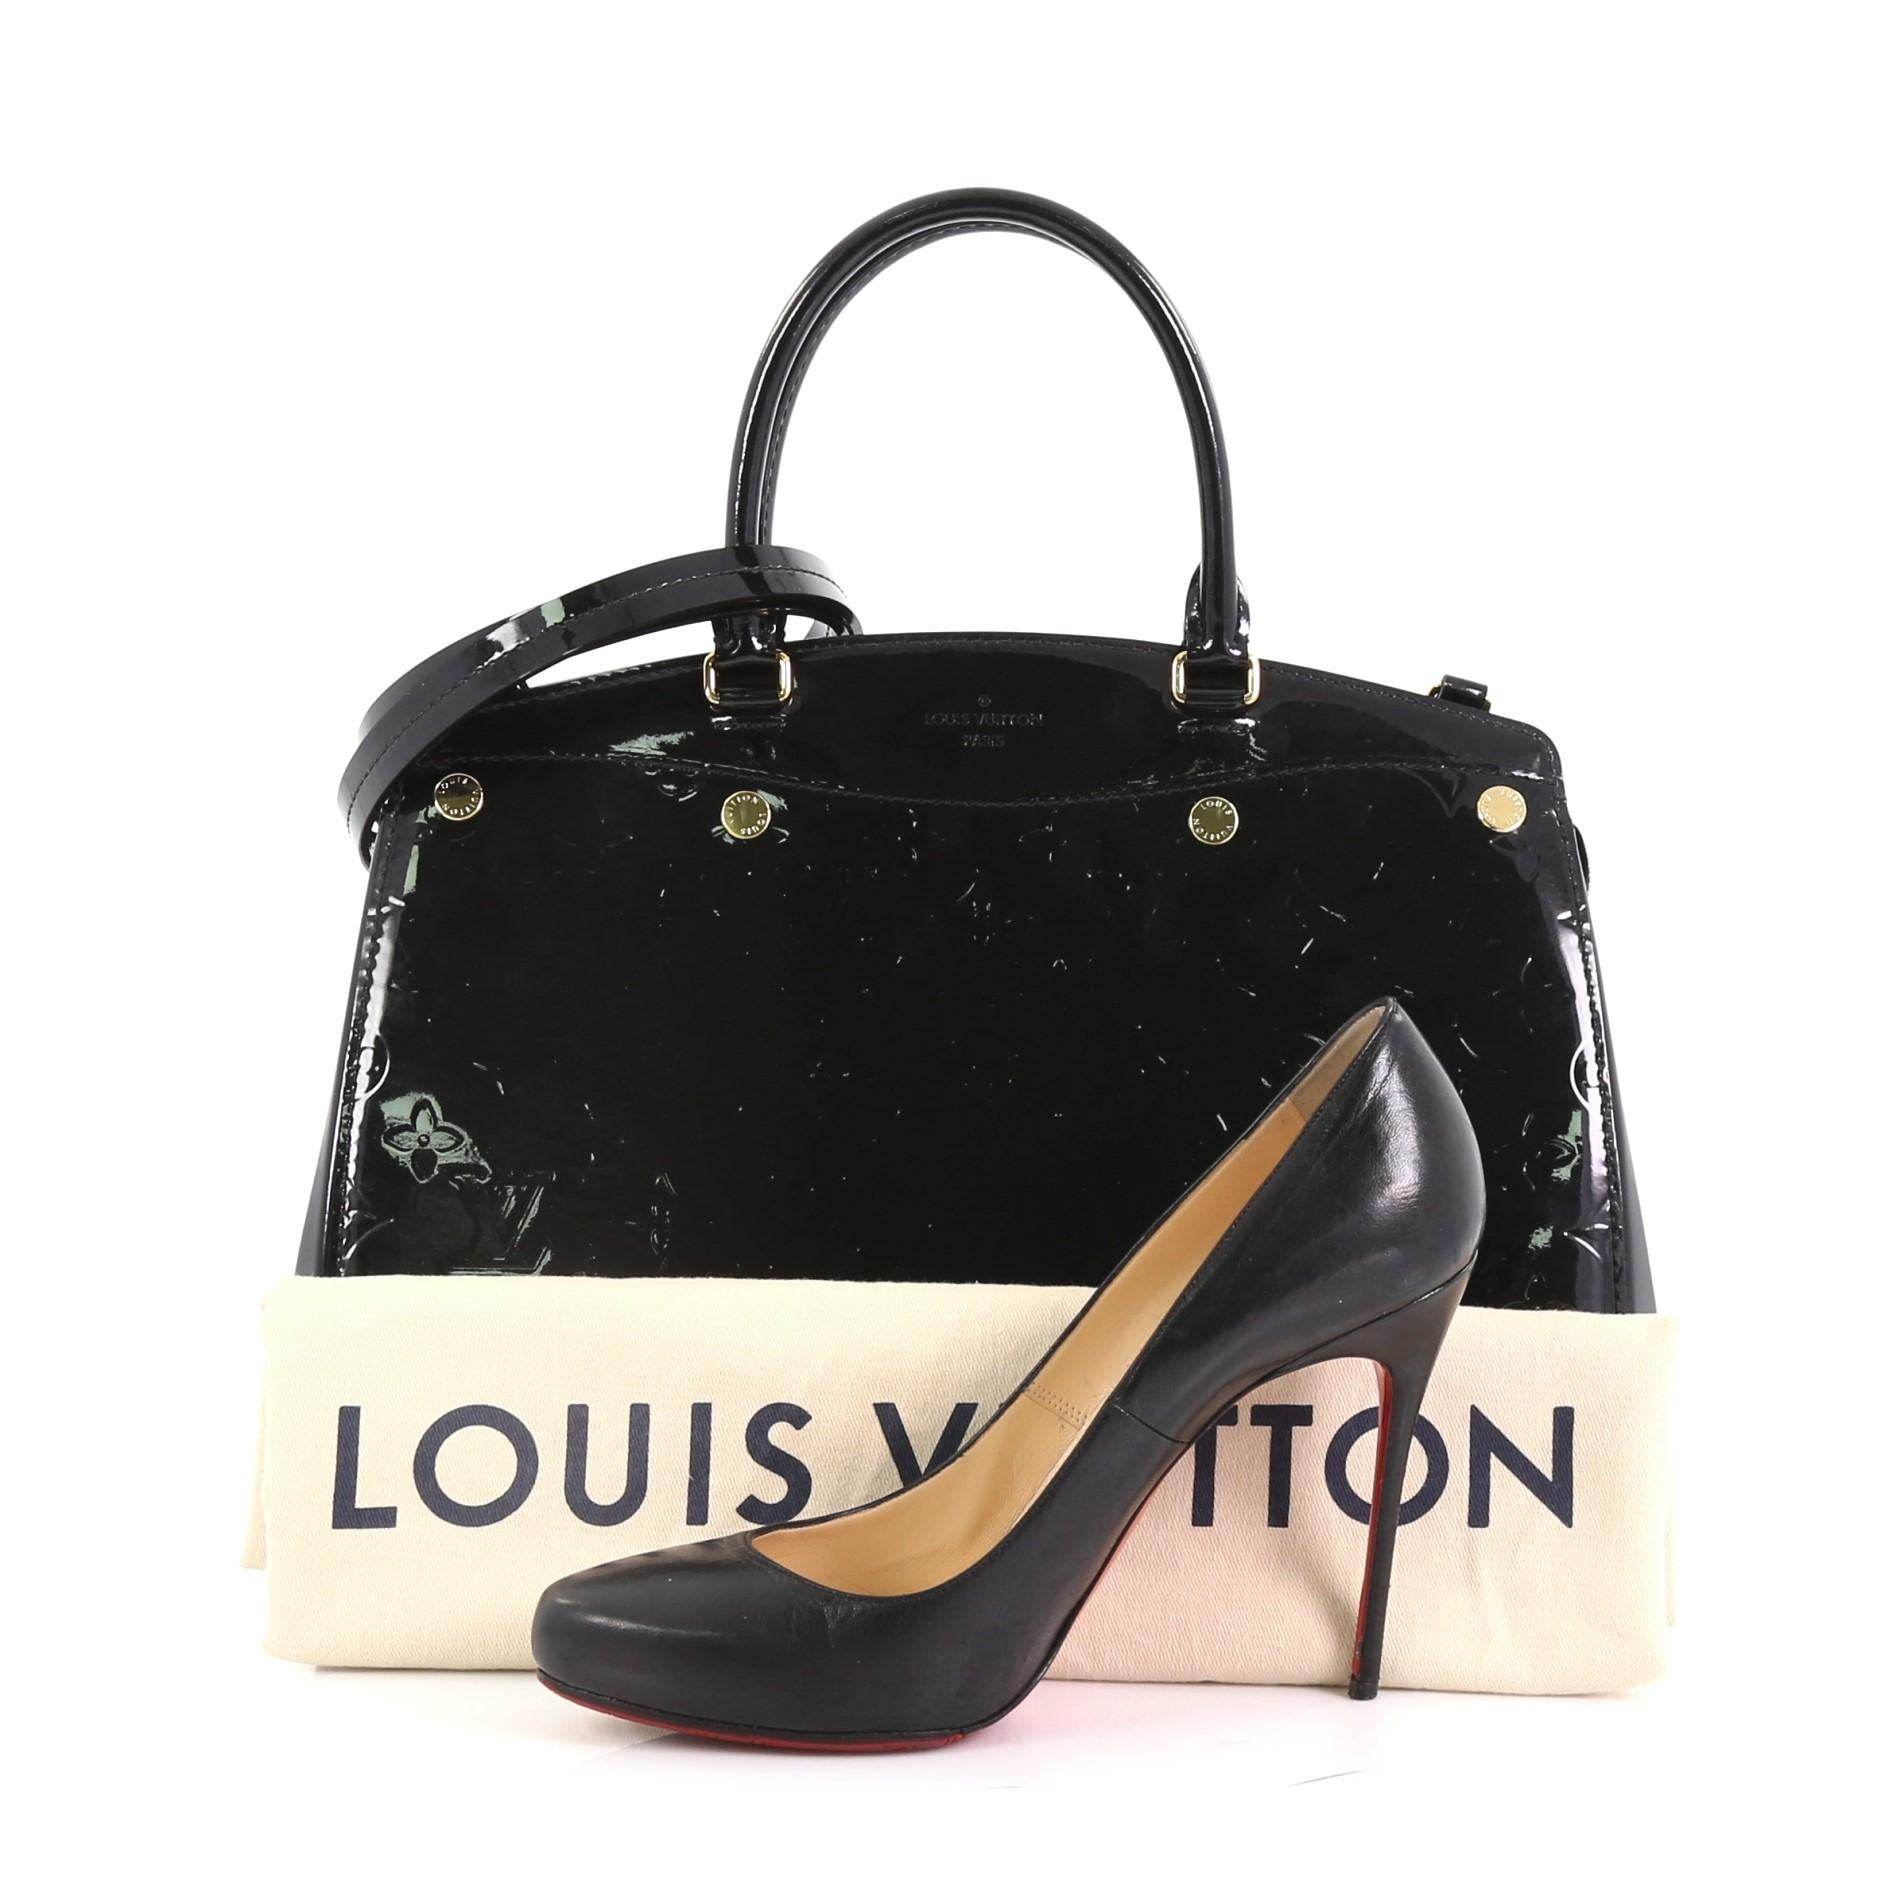 This Louis Vuitton Brea NM Handbag Monogram Vernis MM, crafted in black monogram vernis, features dual rolled handles, protective base studs, and gold-tone hardware. Its top zip closure opens to a black fabric interior with zip and slip pockets.